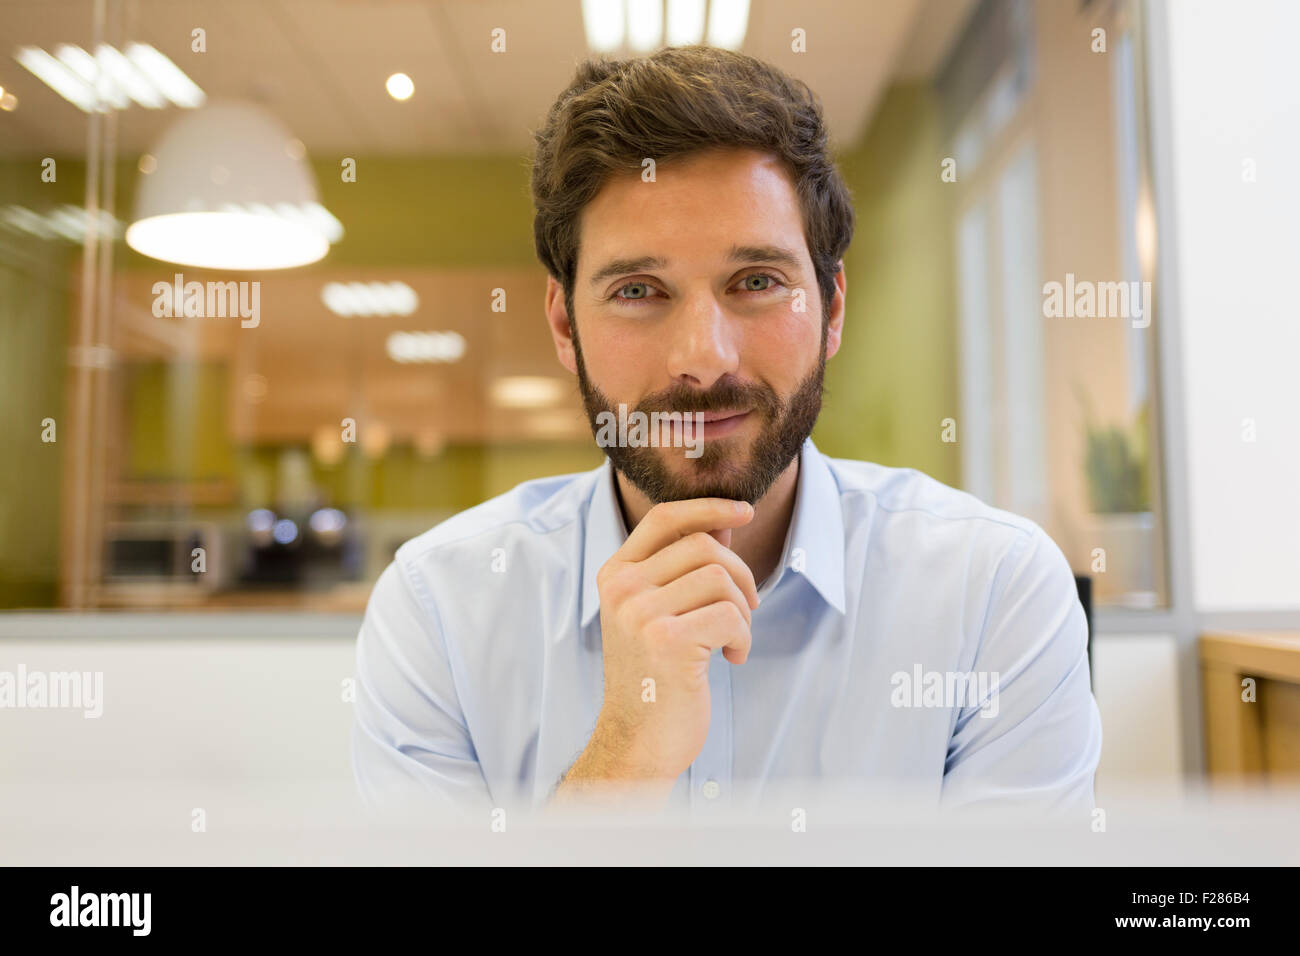 Portrait of confident bearded businessman in office Stock Photo